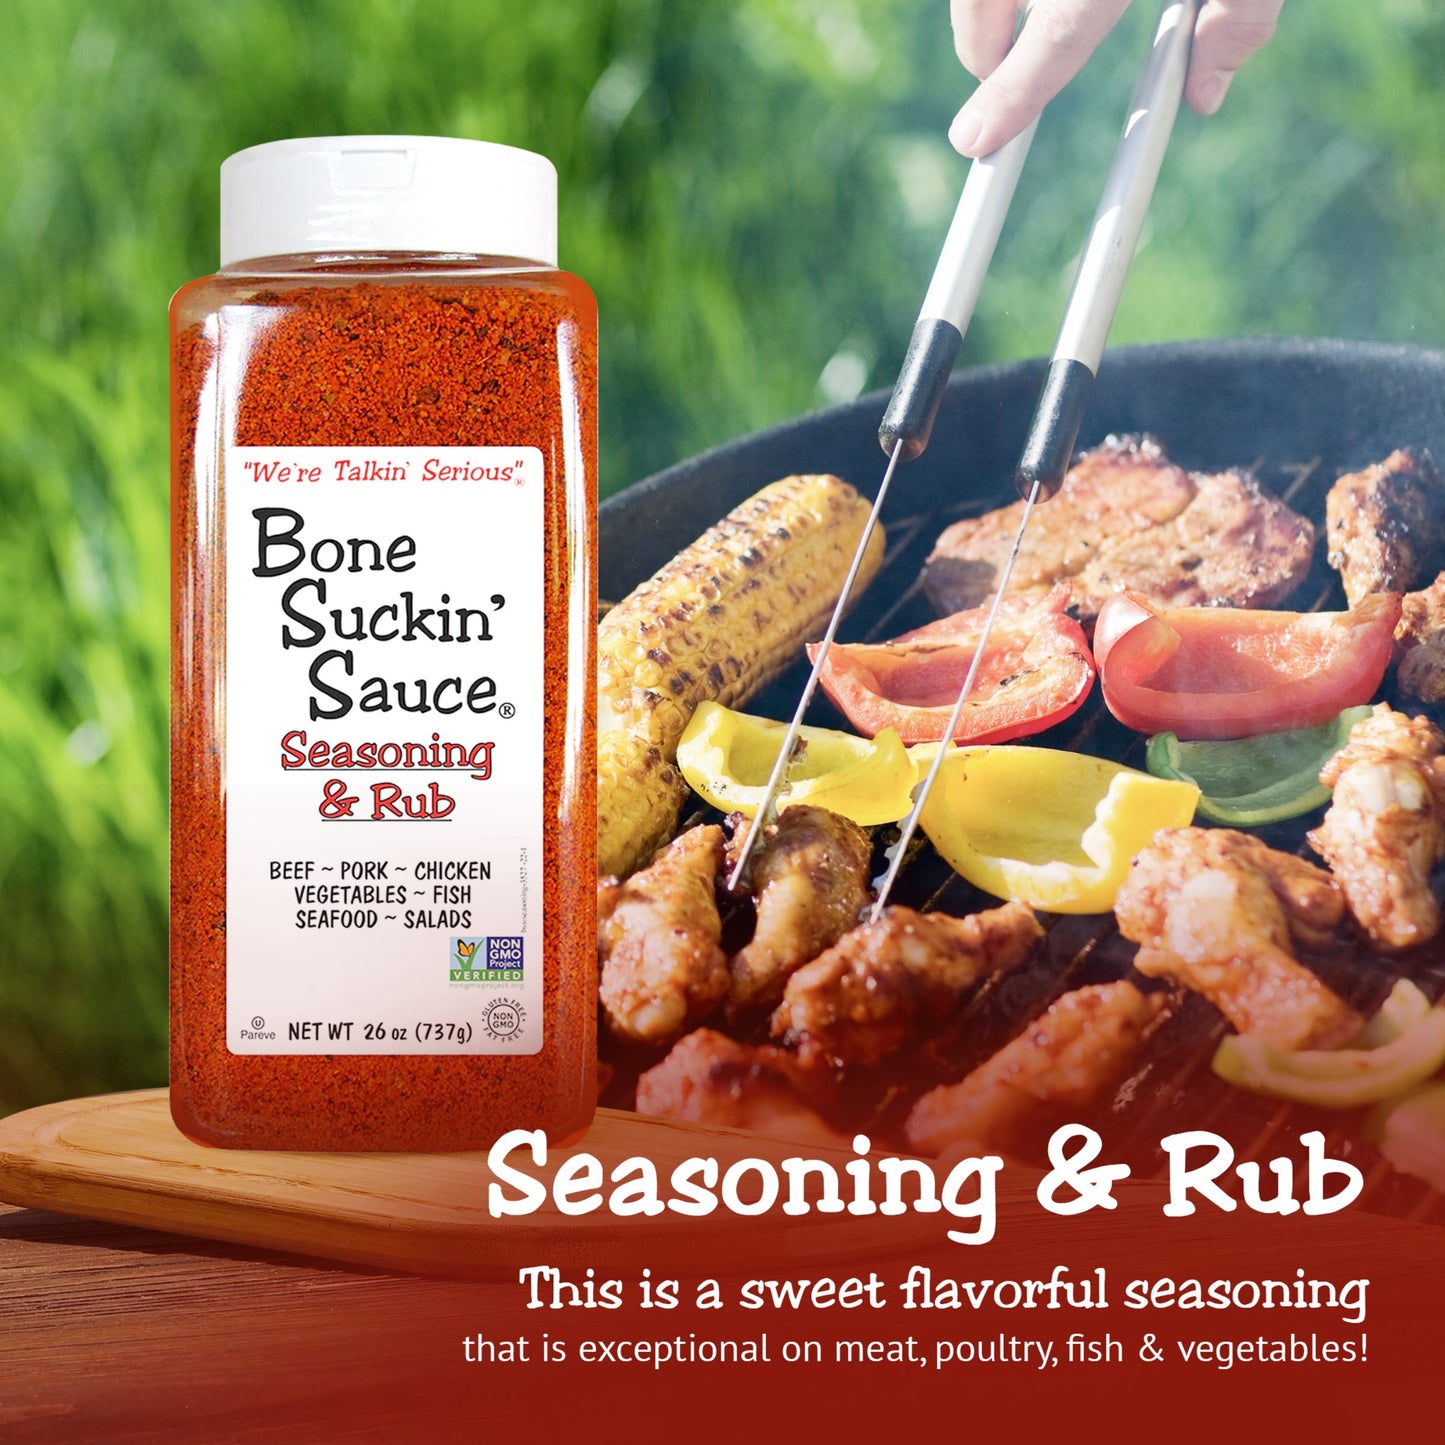 Bone Suckin’® Seasoning & Rub, 26 oz. This is a sweet flavorful seasoning that is exceptional on meat, poultry, fish and vegetables.